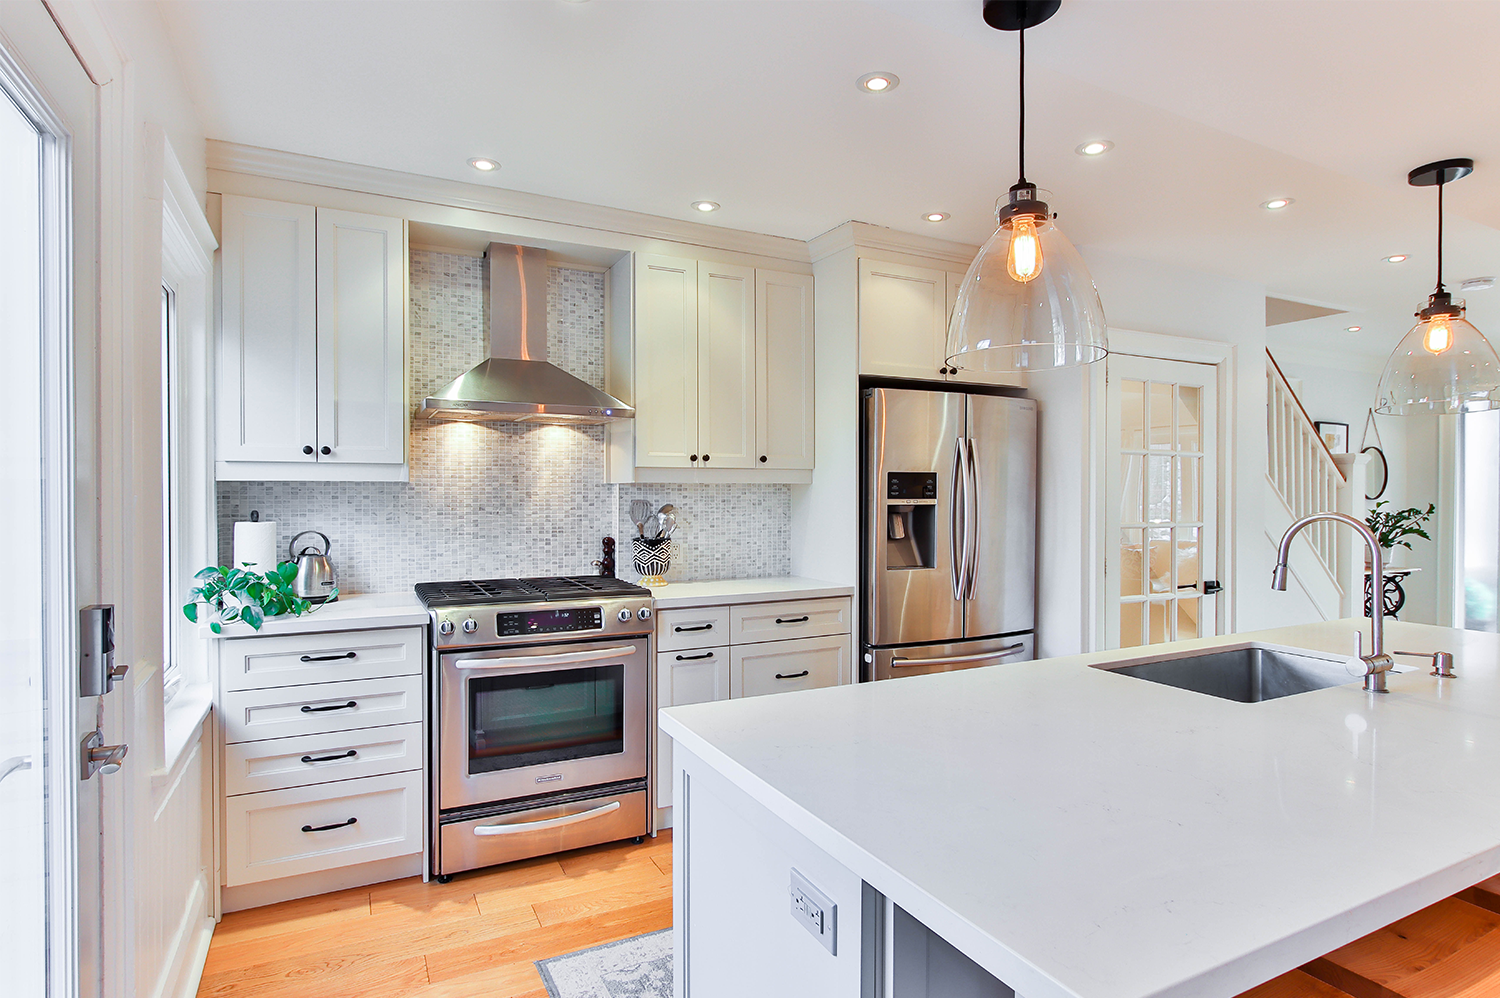 Kitchen remodeling tips helped transform this kitchen from dated to clean, new, and modern.